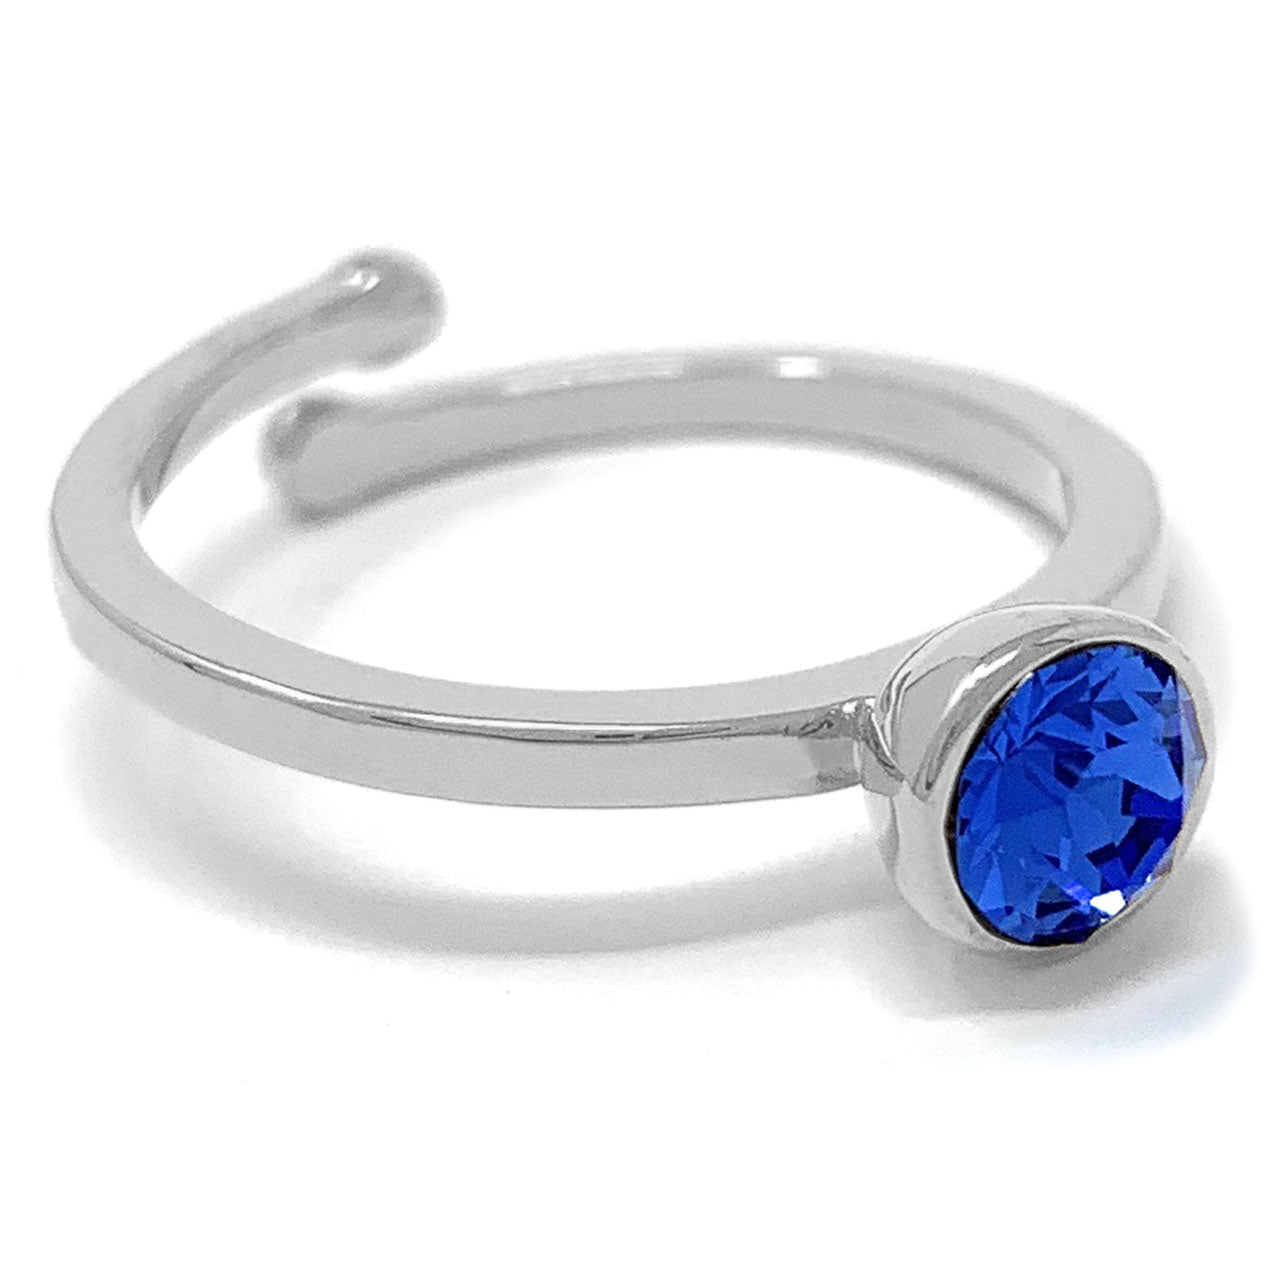 Harley Adjustable Ring with Blue Sapphire Round Crystals from Swarovski Silver Toned Rhodium Plated - Ed Heart